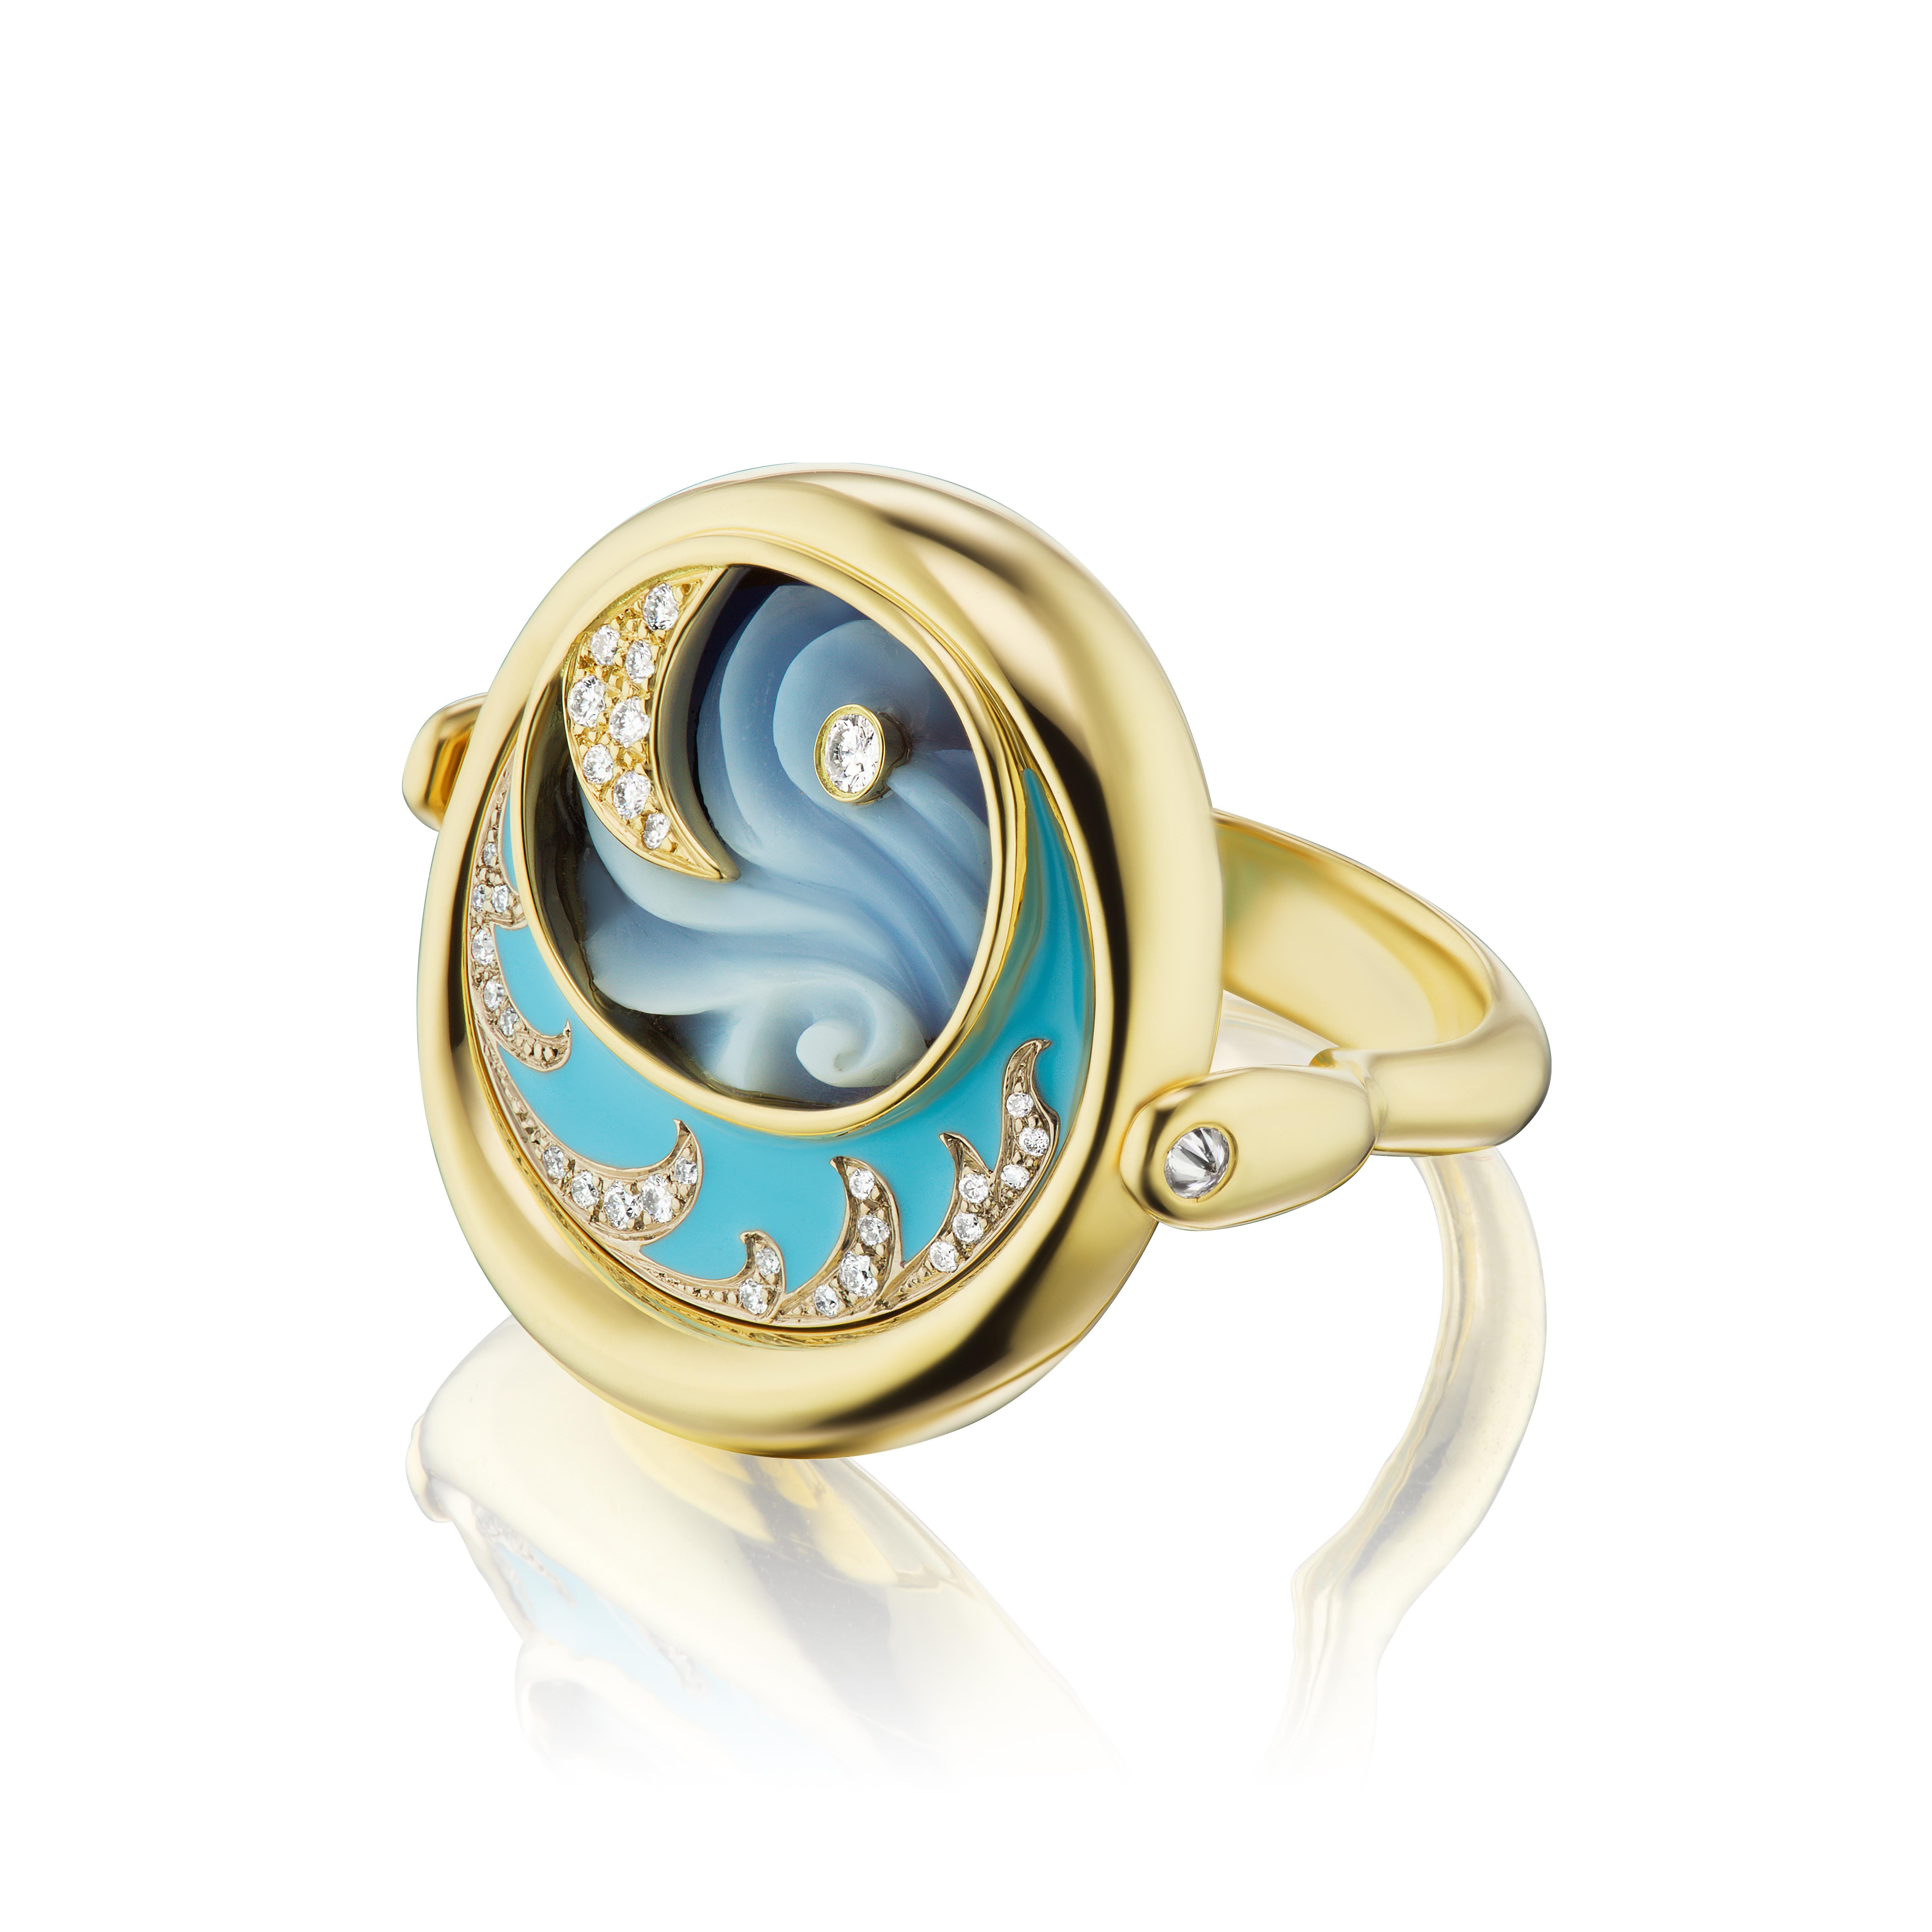 4 elements ring